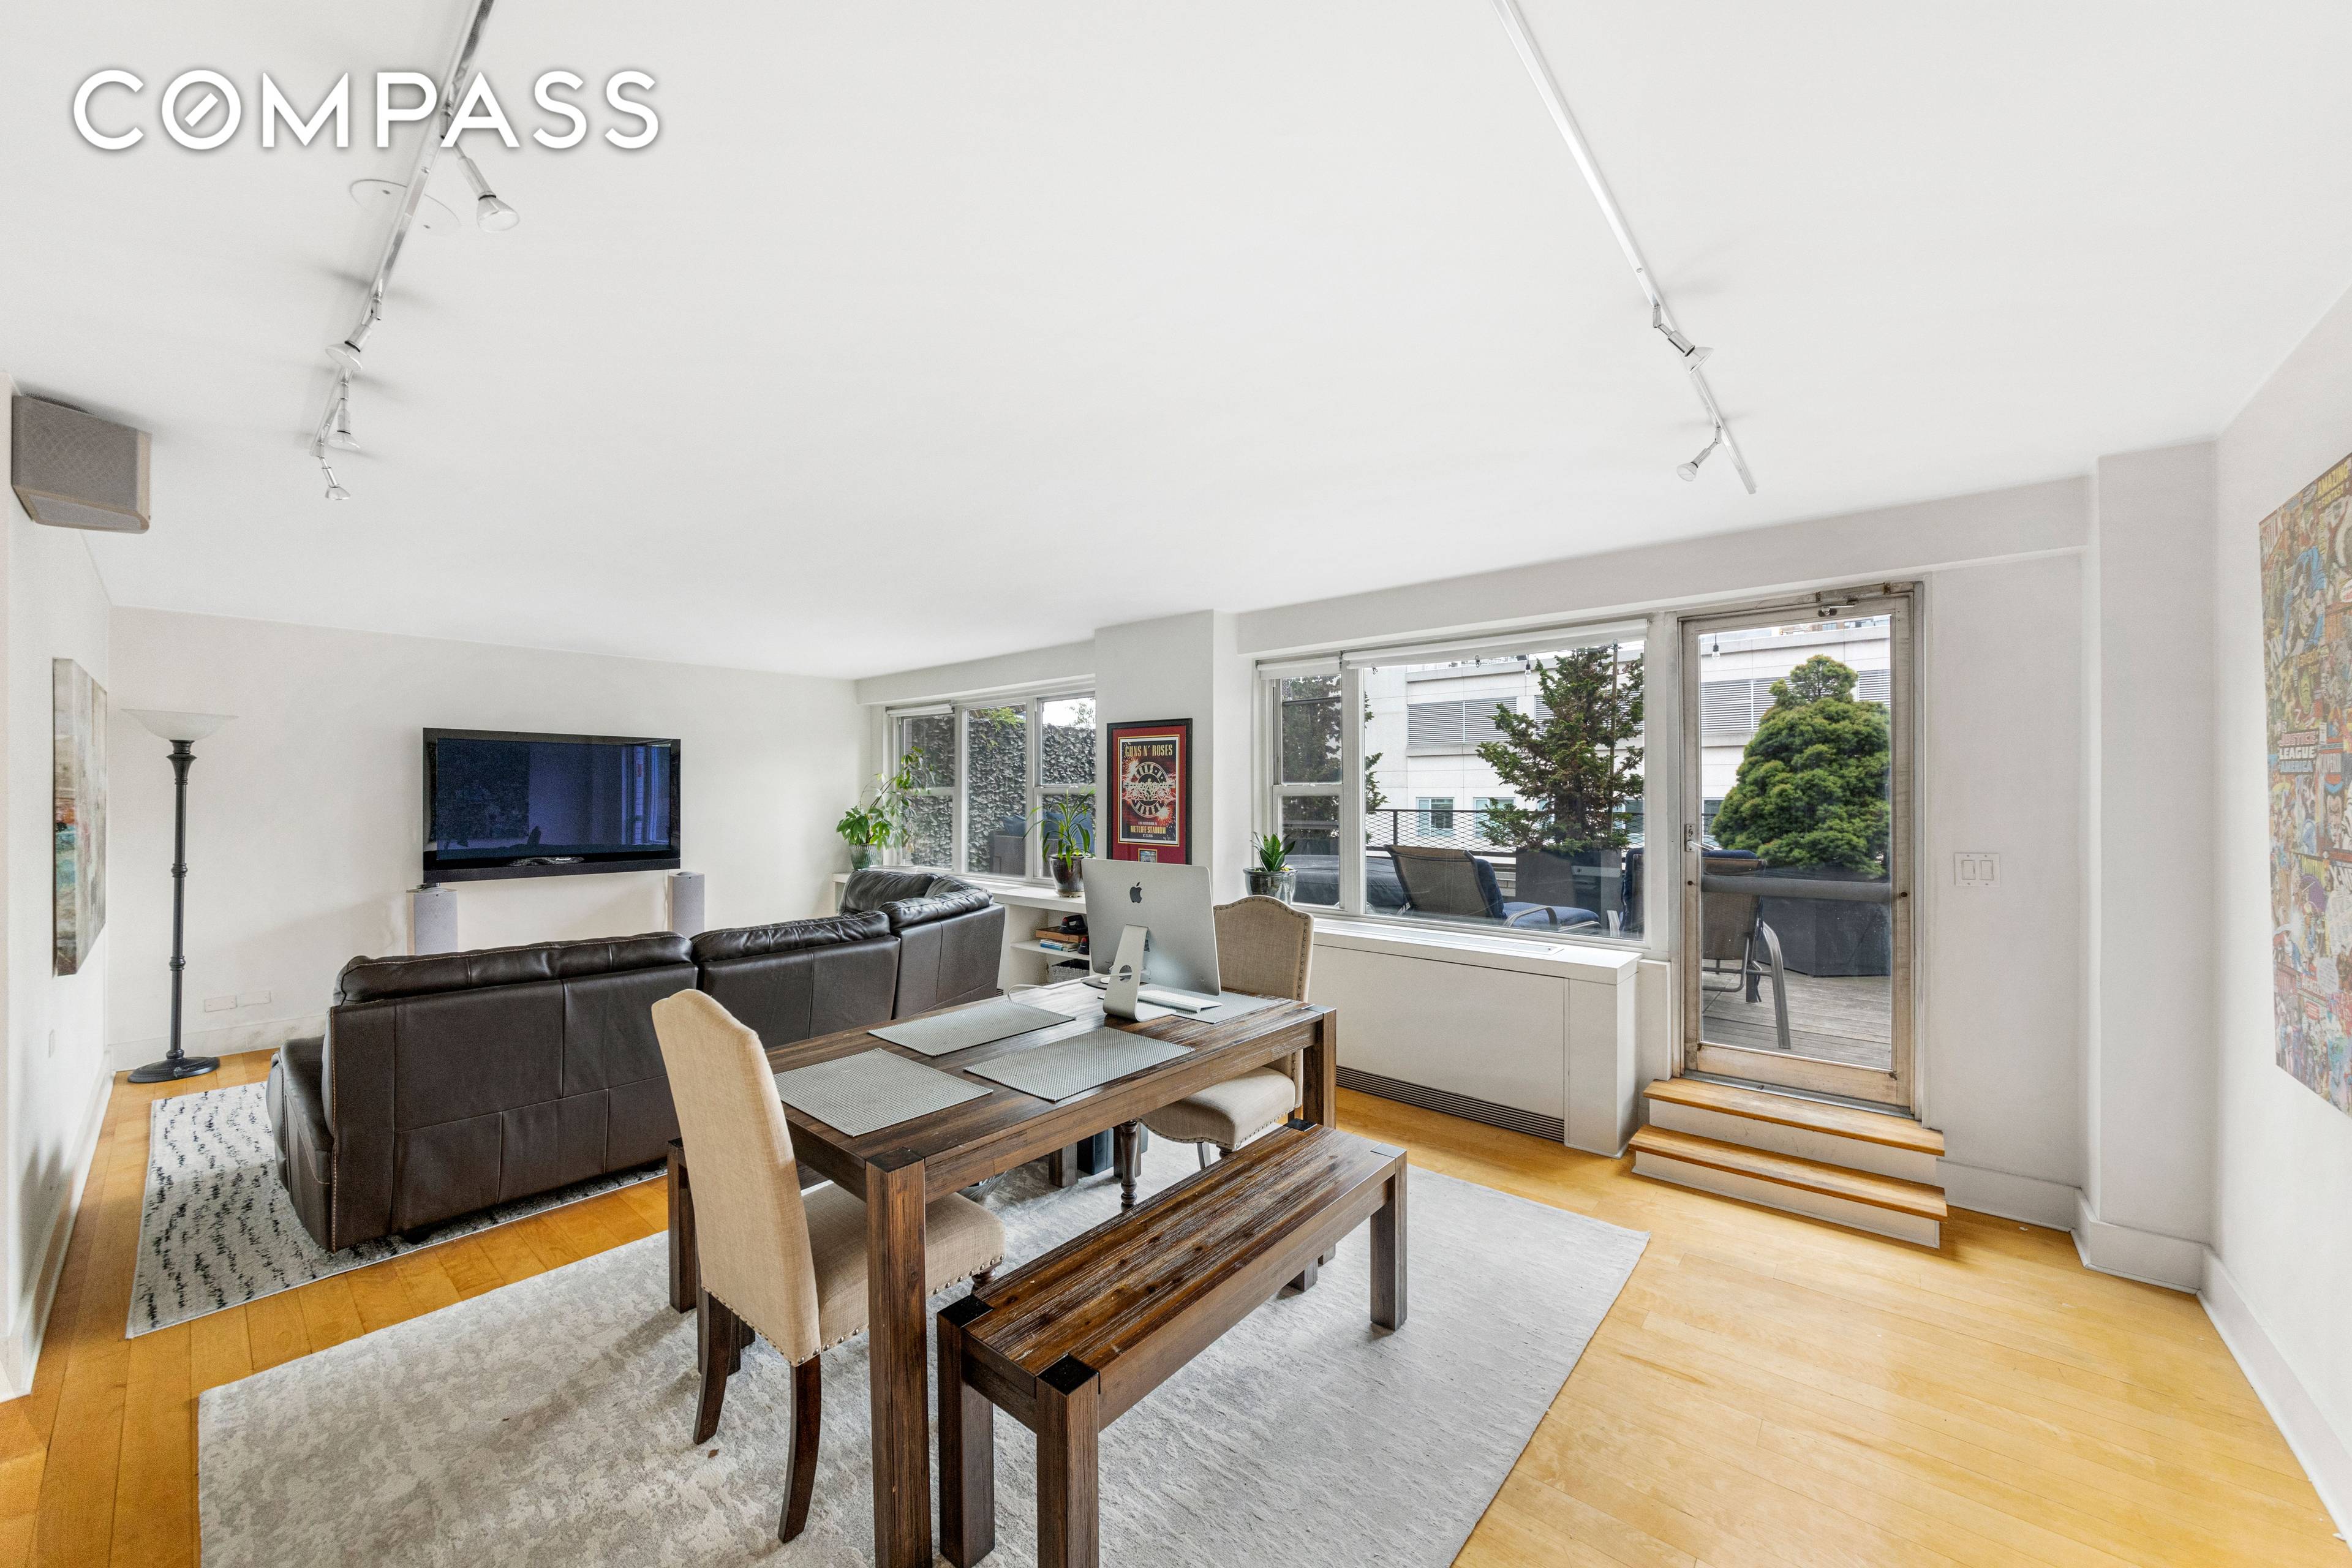 APPLICATION PENDING New to market, a wall of twelve south facing windows, extend the entire length of this generously proportioned 1 bedroom home.